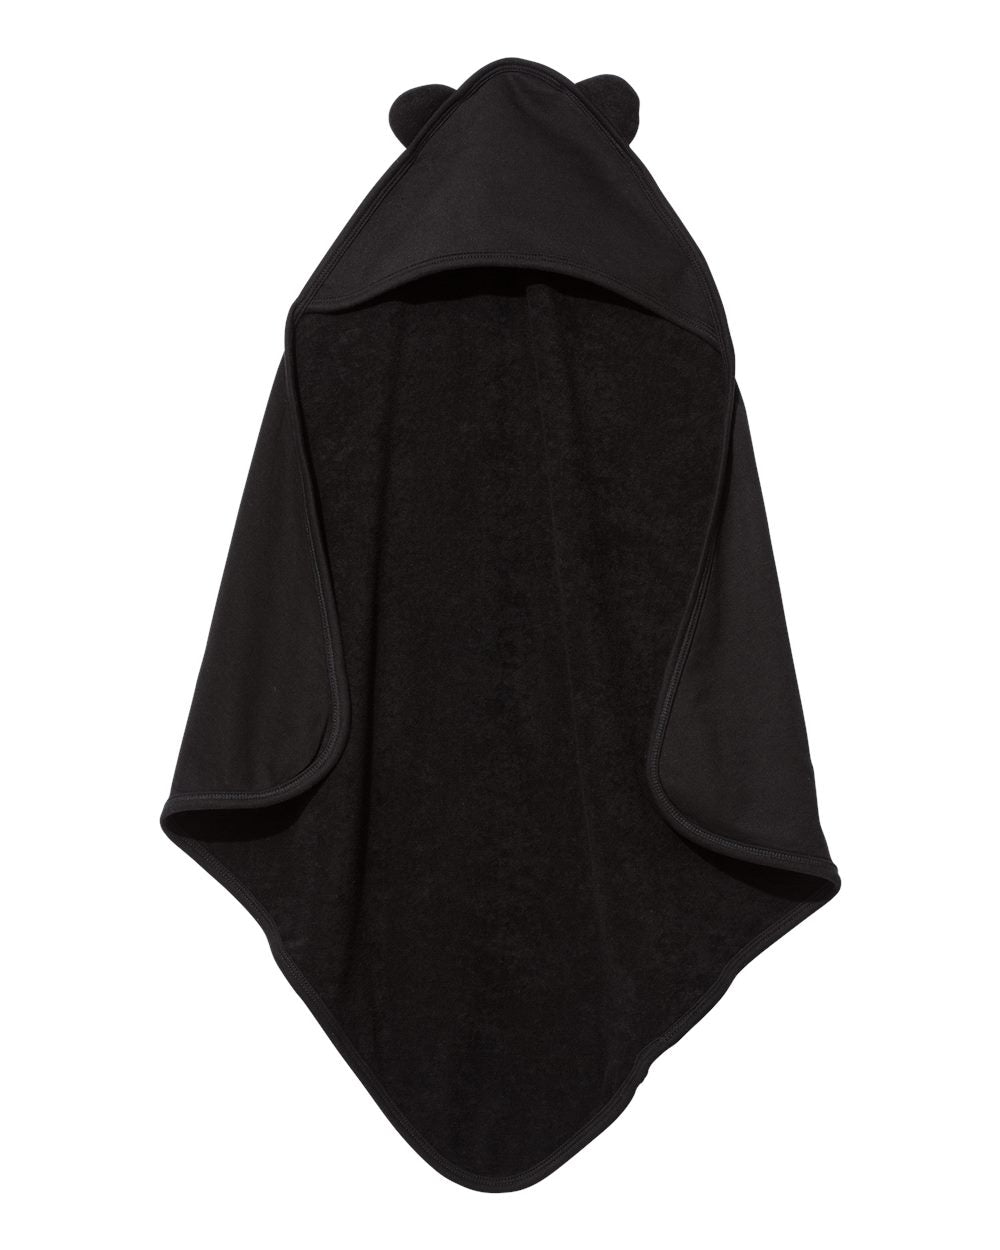 Baby / Toddler --- Hooded Towel with Ears, Black